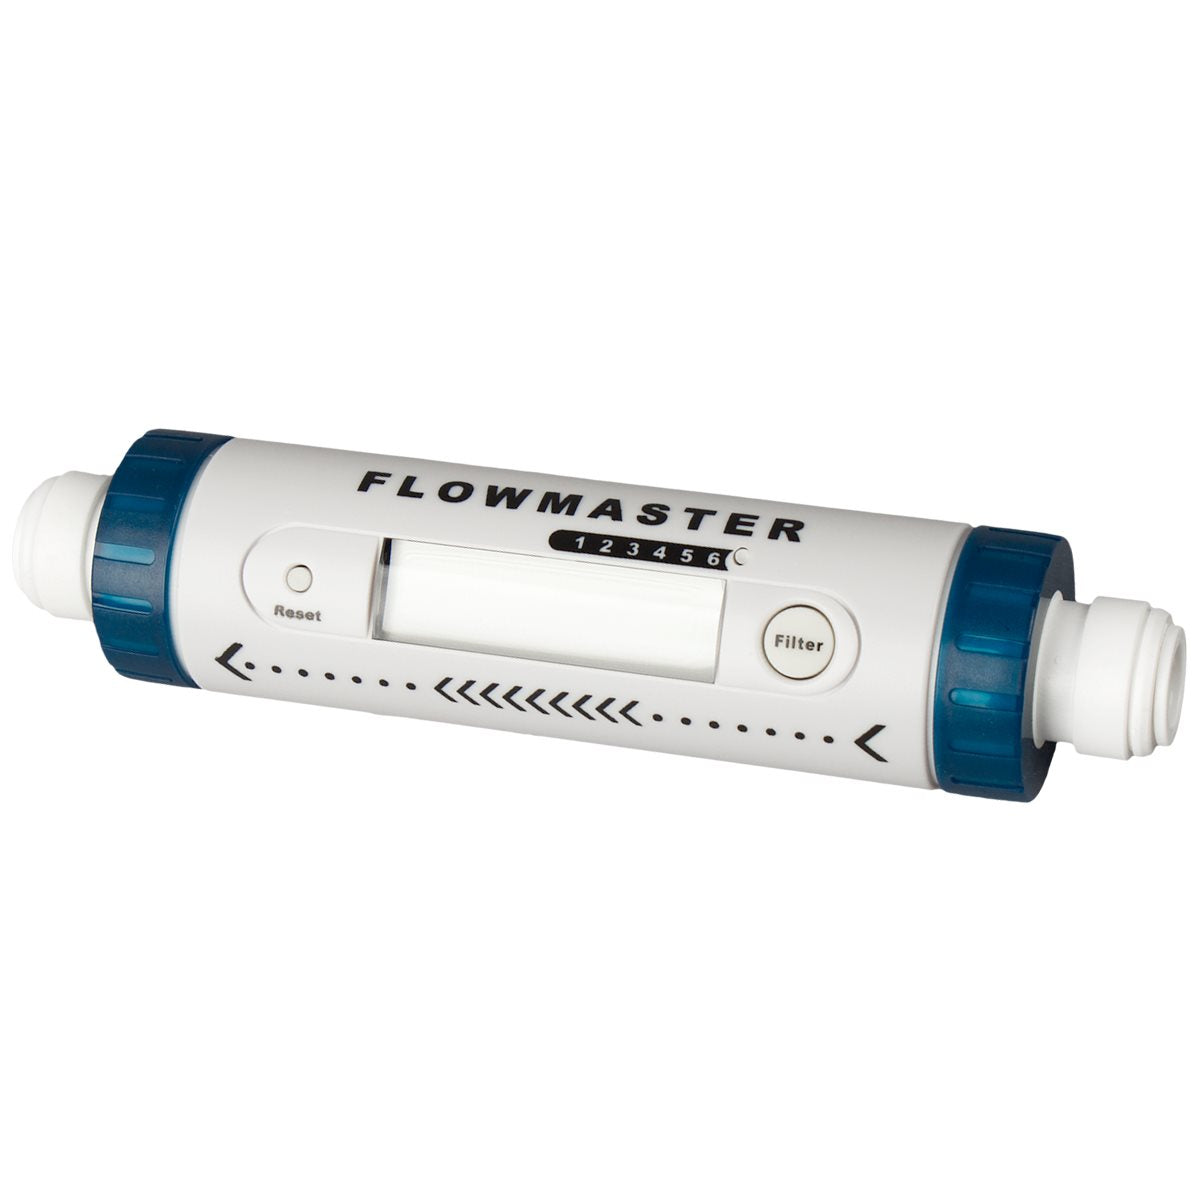 Product Image:Hydro-Logic Flowmaster Ultra Low Flow Model 1/4 in